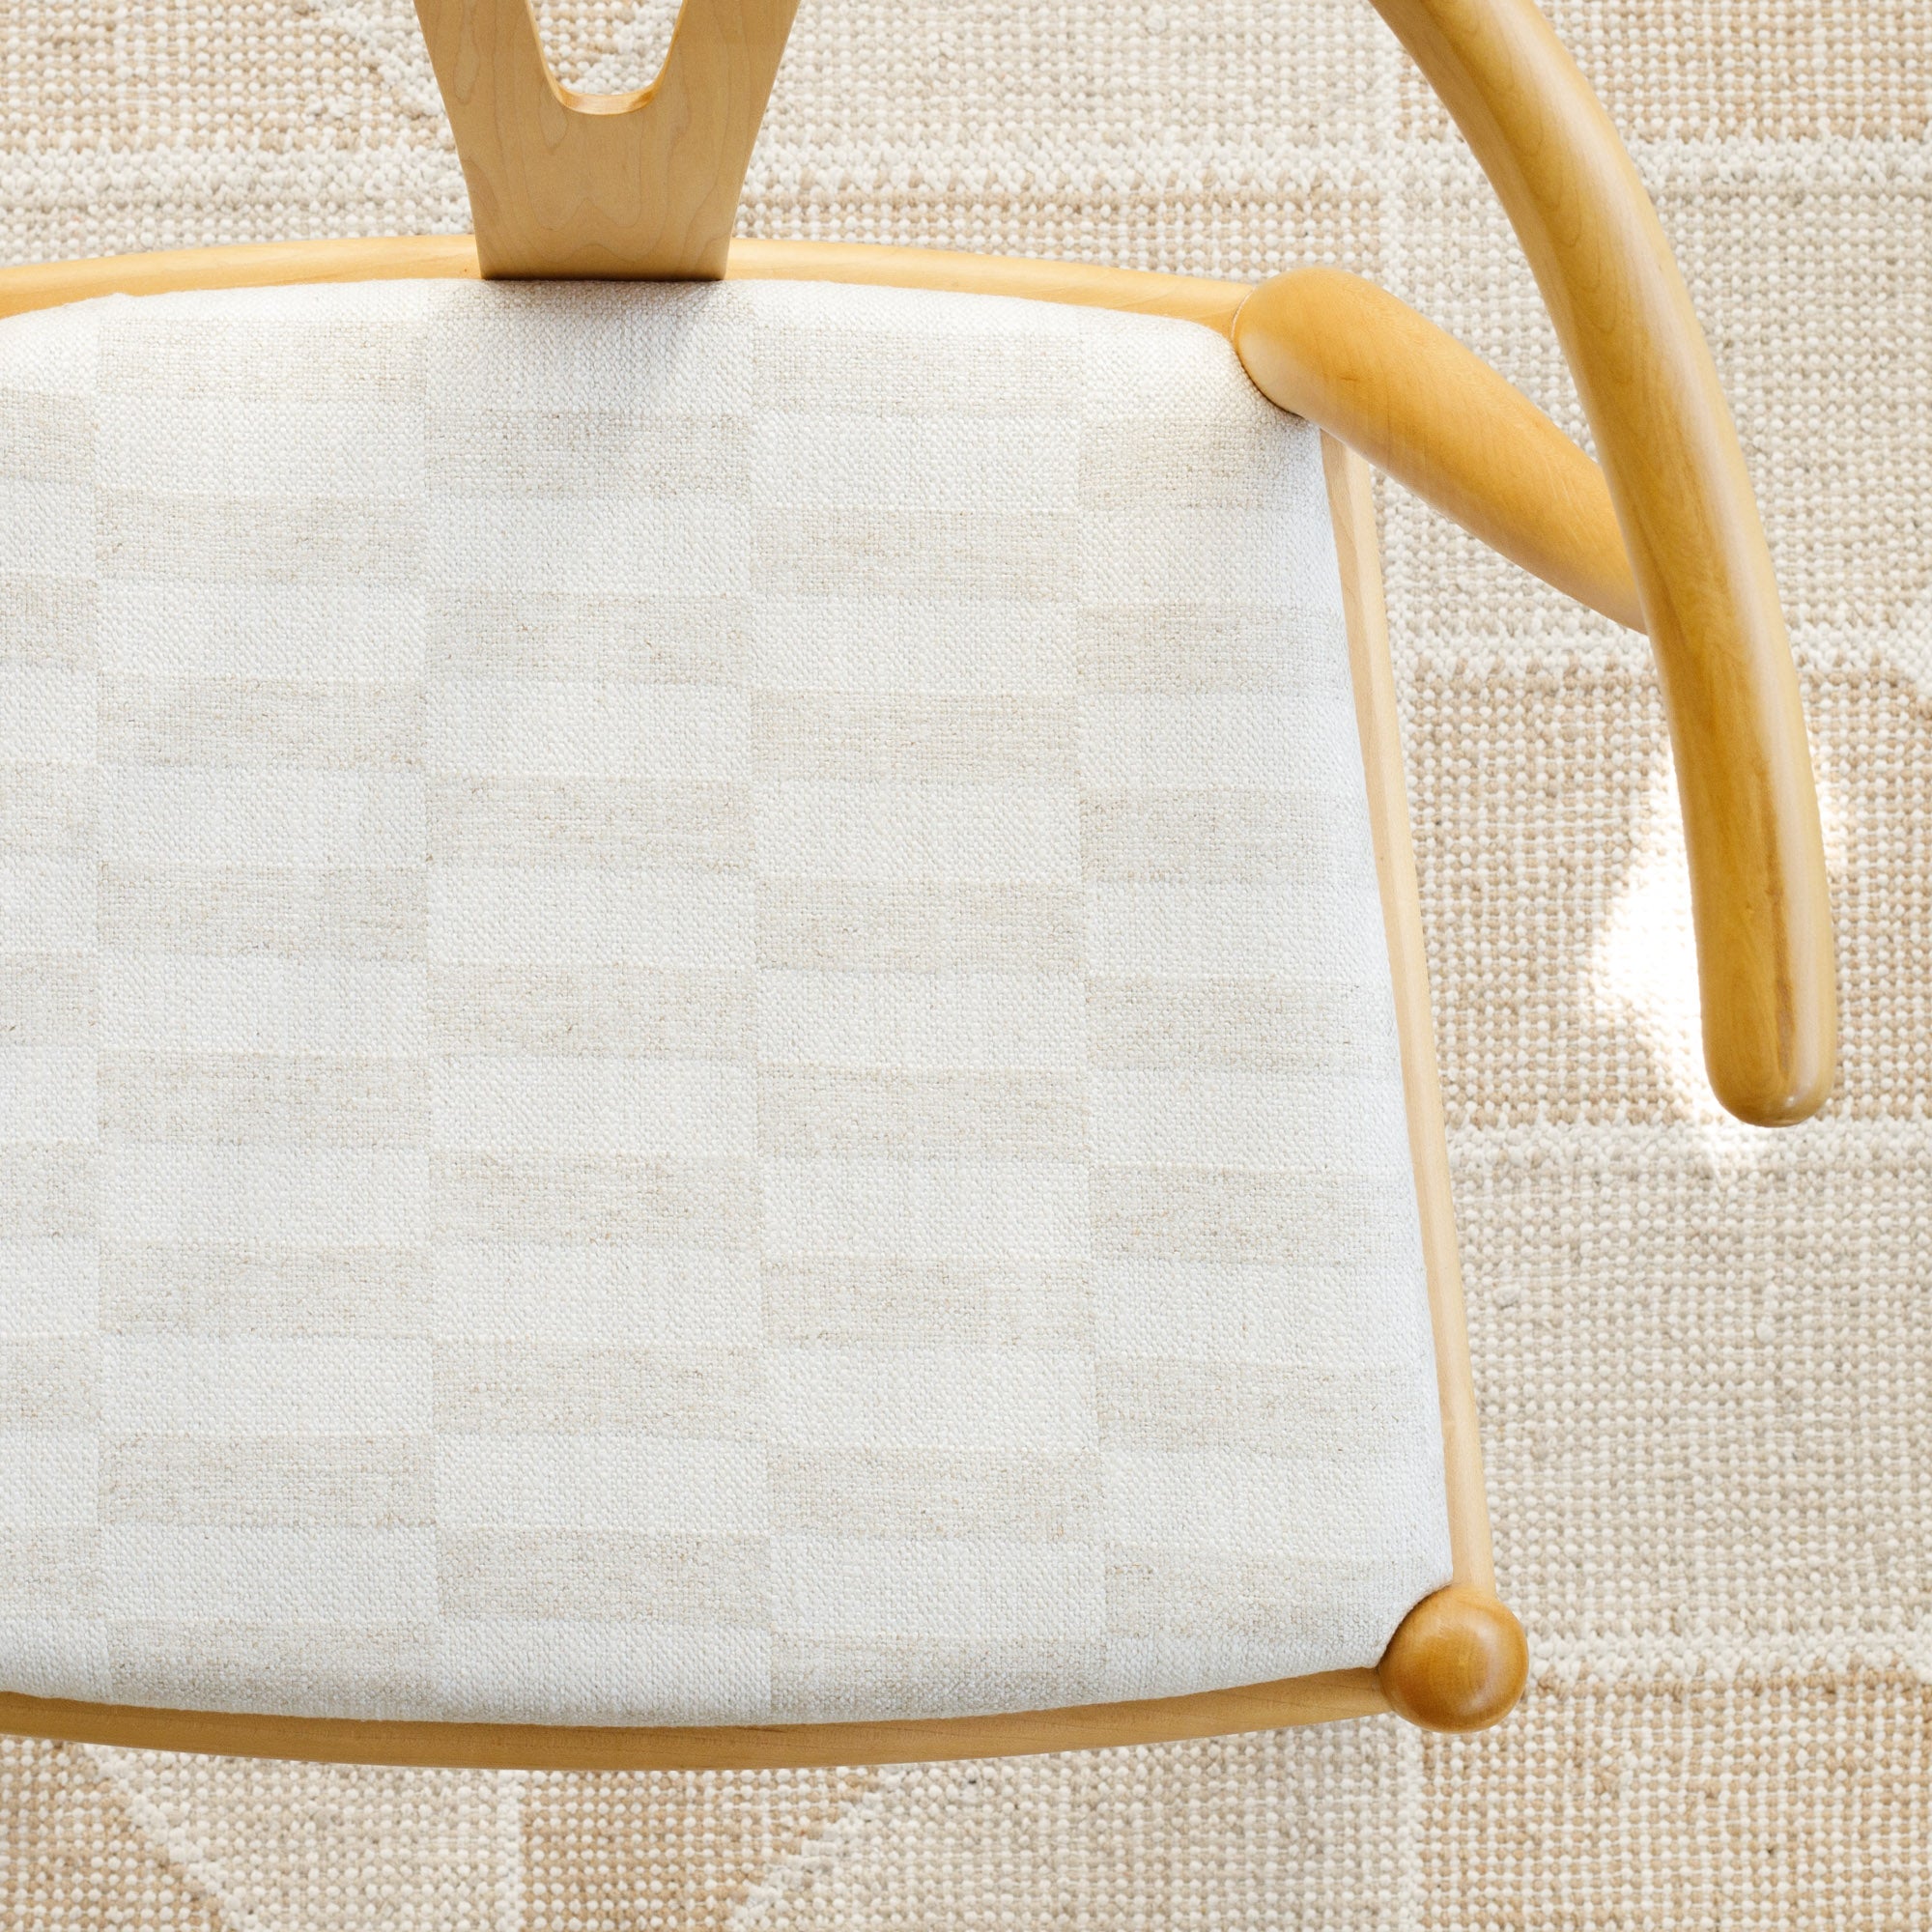 a cream and beige checkerboard patterned upholstered chair seat